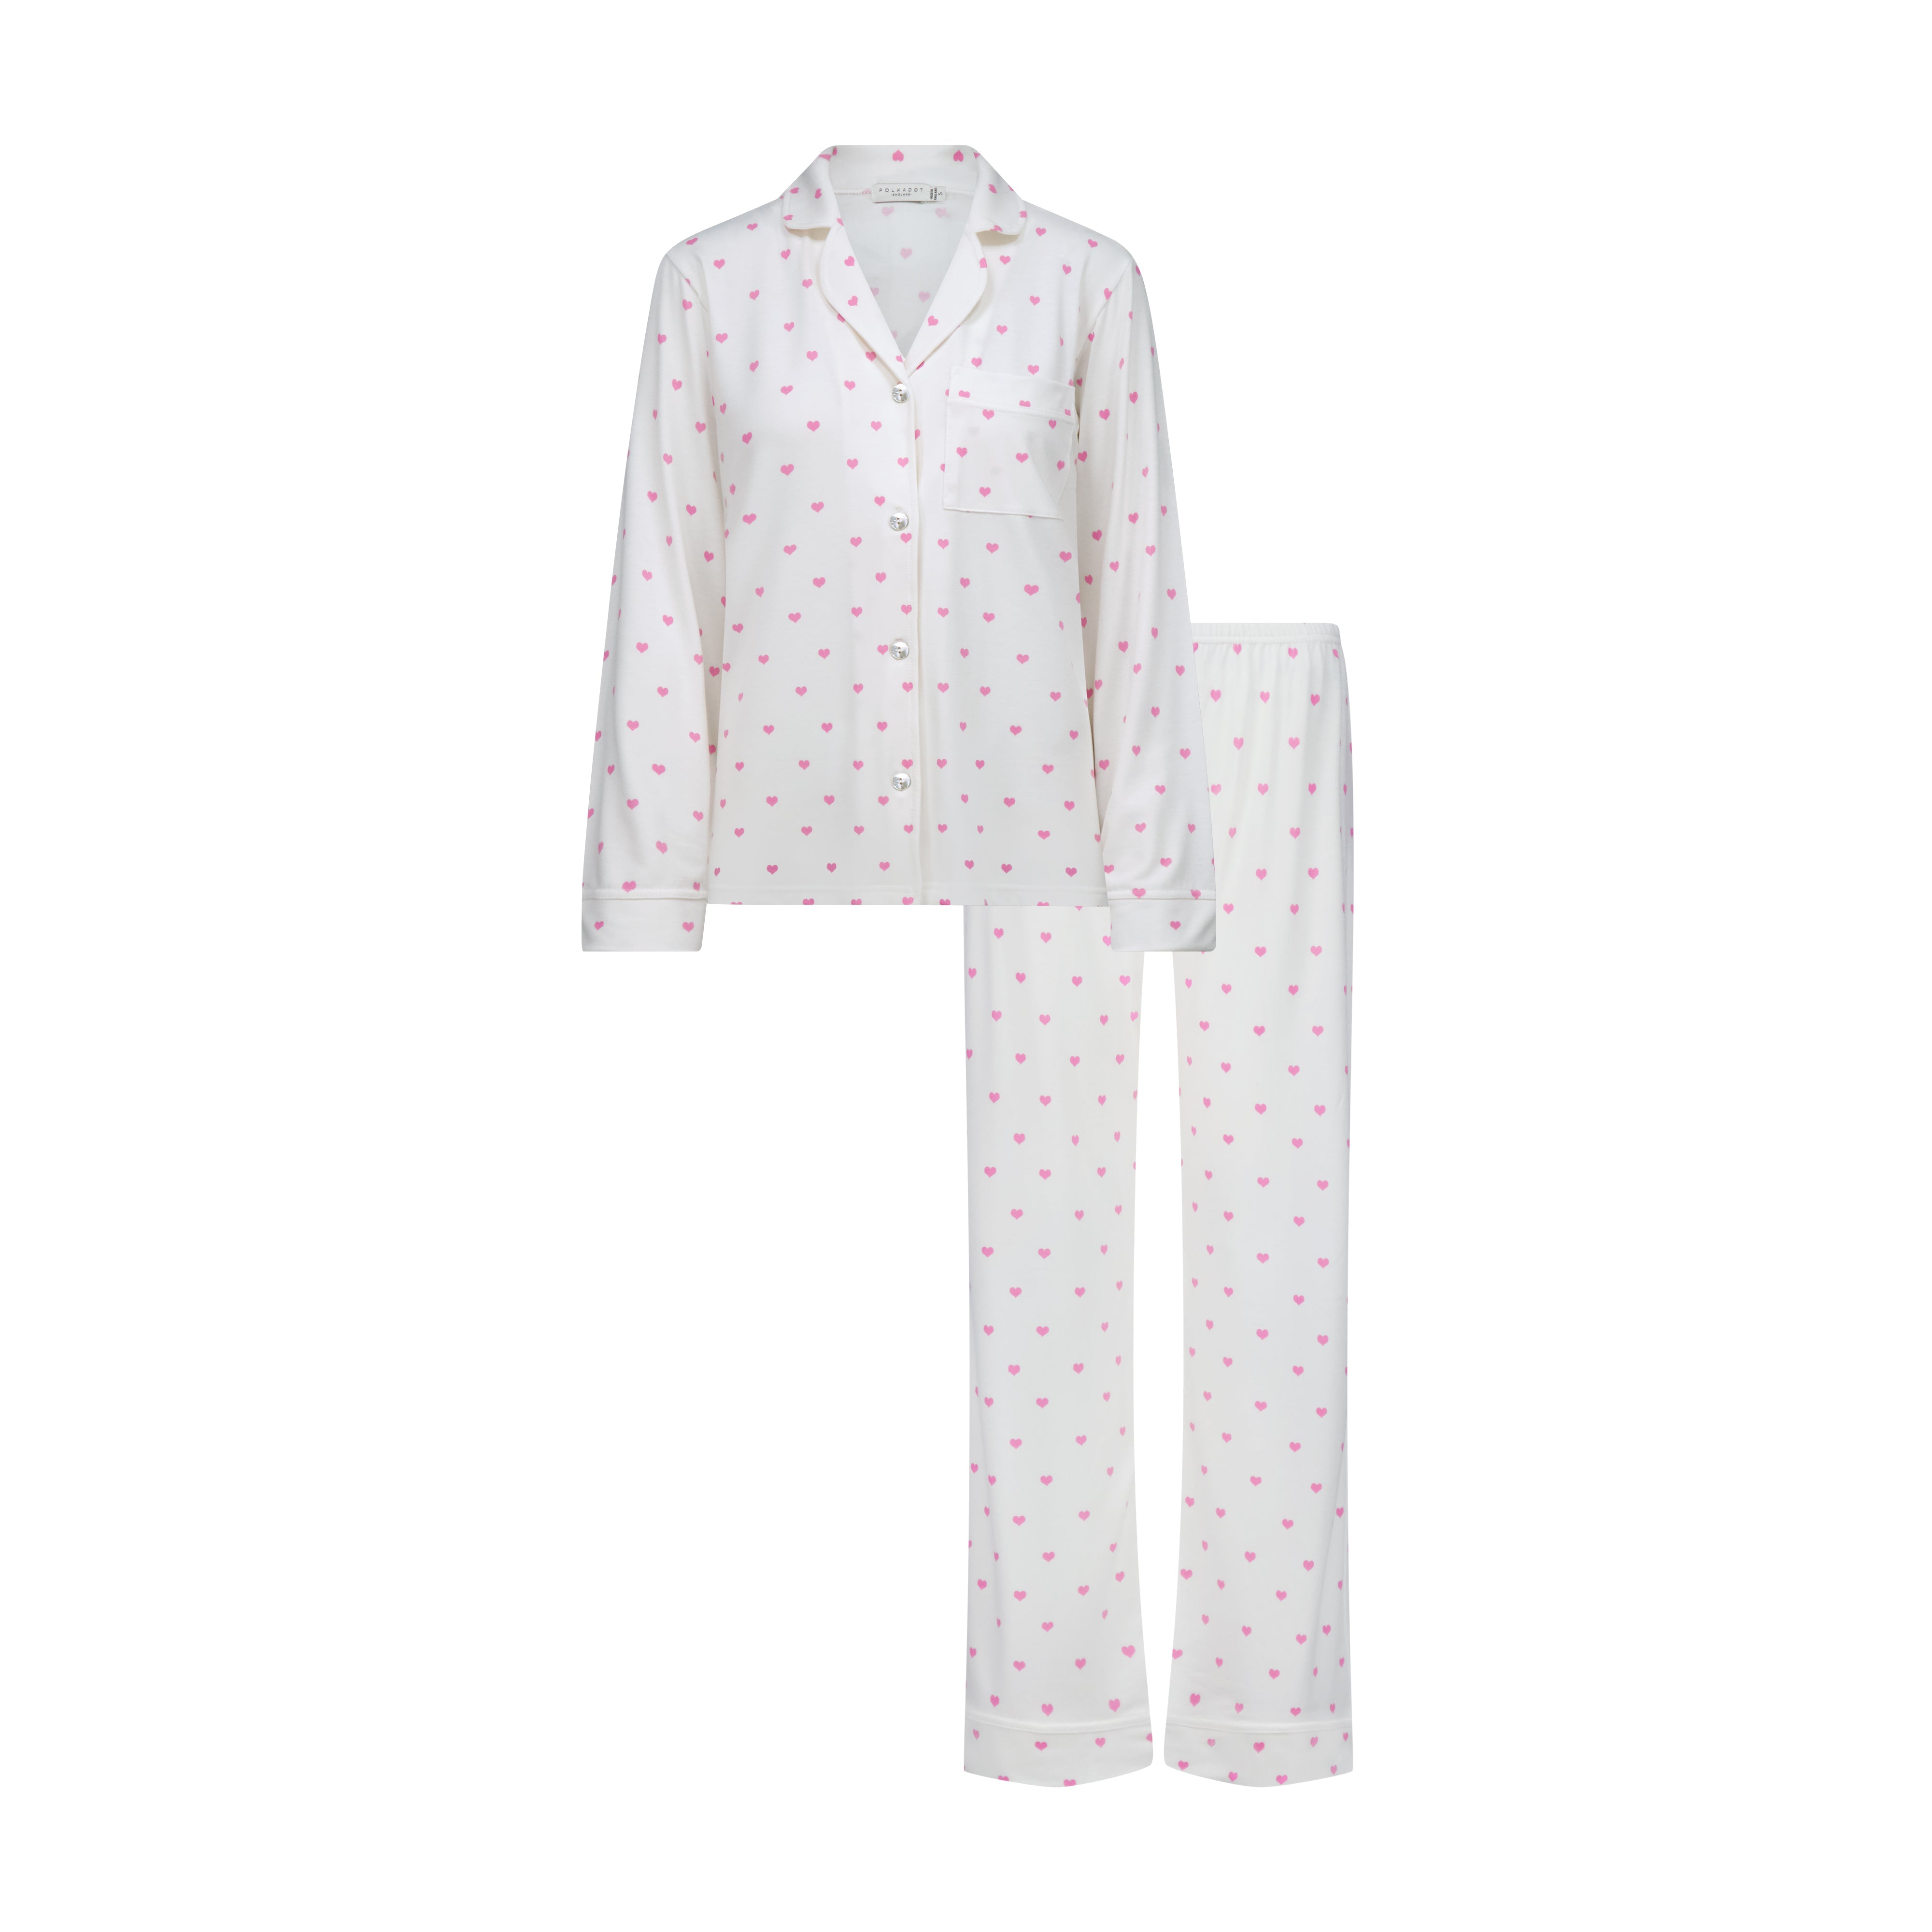 CHARLEY Pajama Set in Pink Hearts Print -NEW COLOR